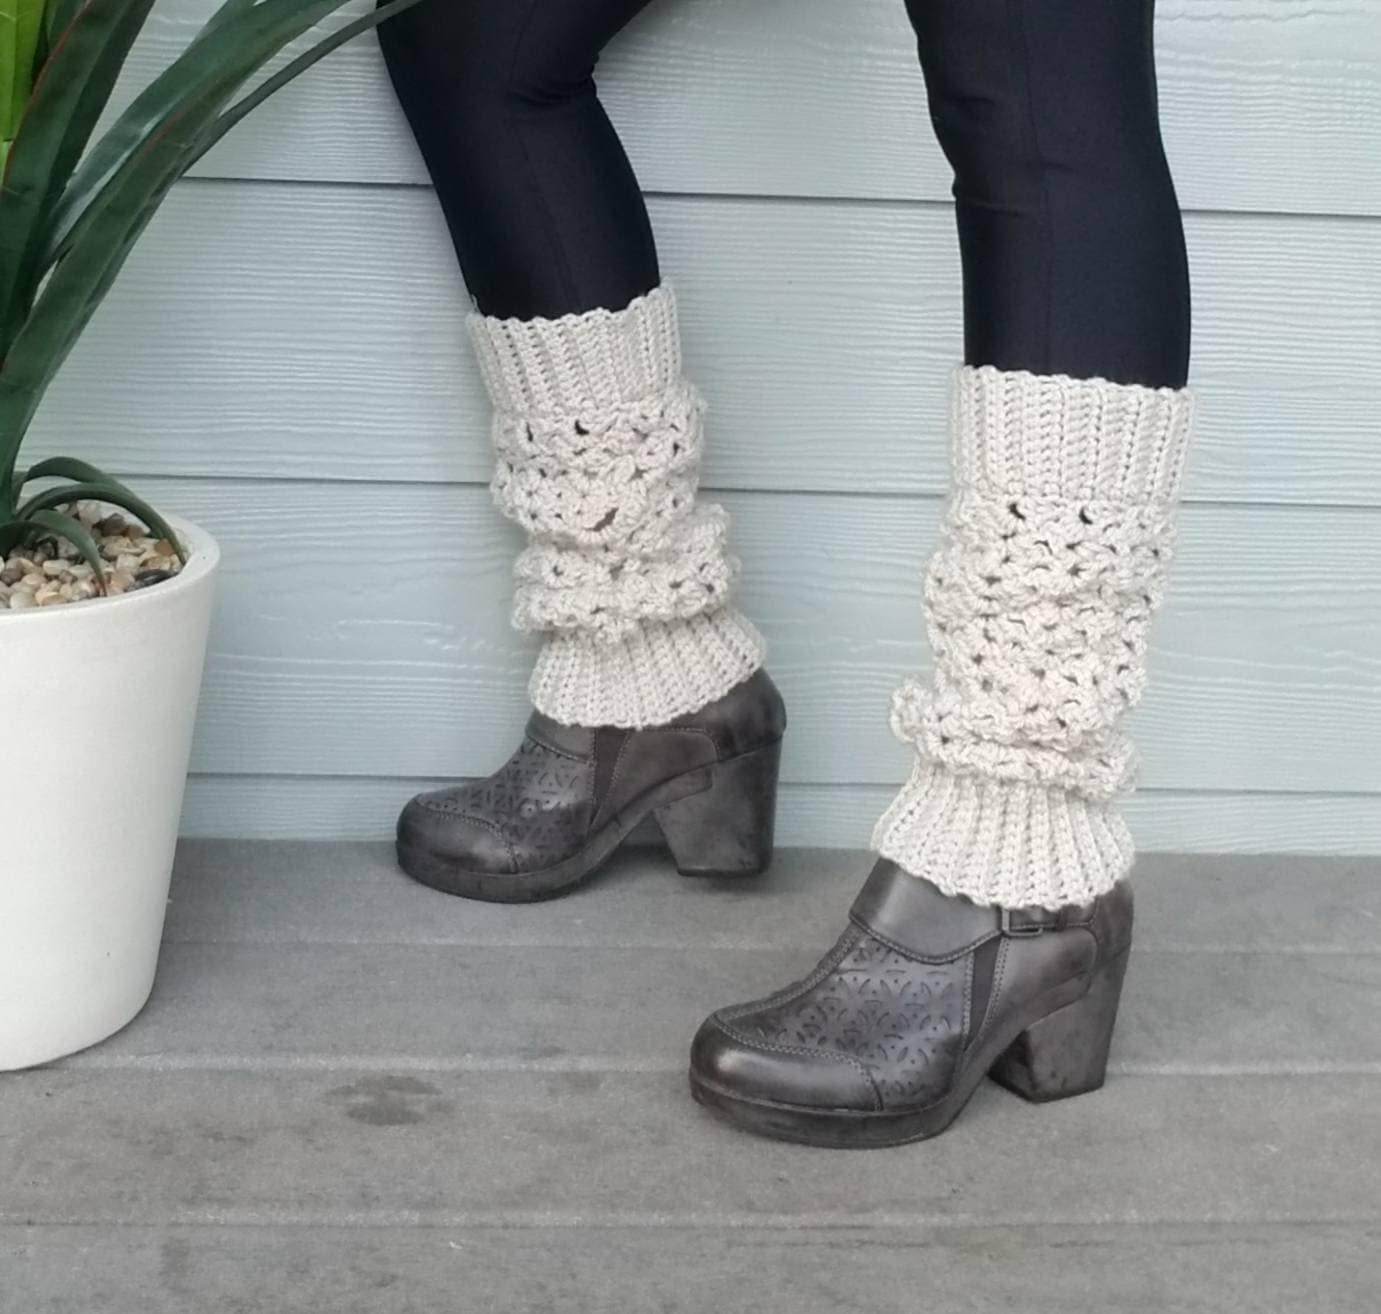 3 Ways to Wear Leg Warmers - The Budget Babe